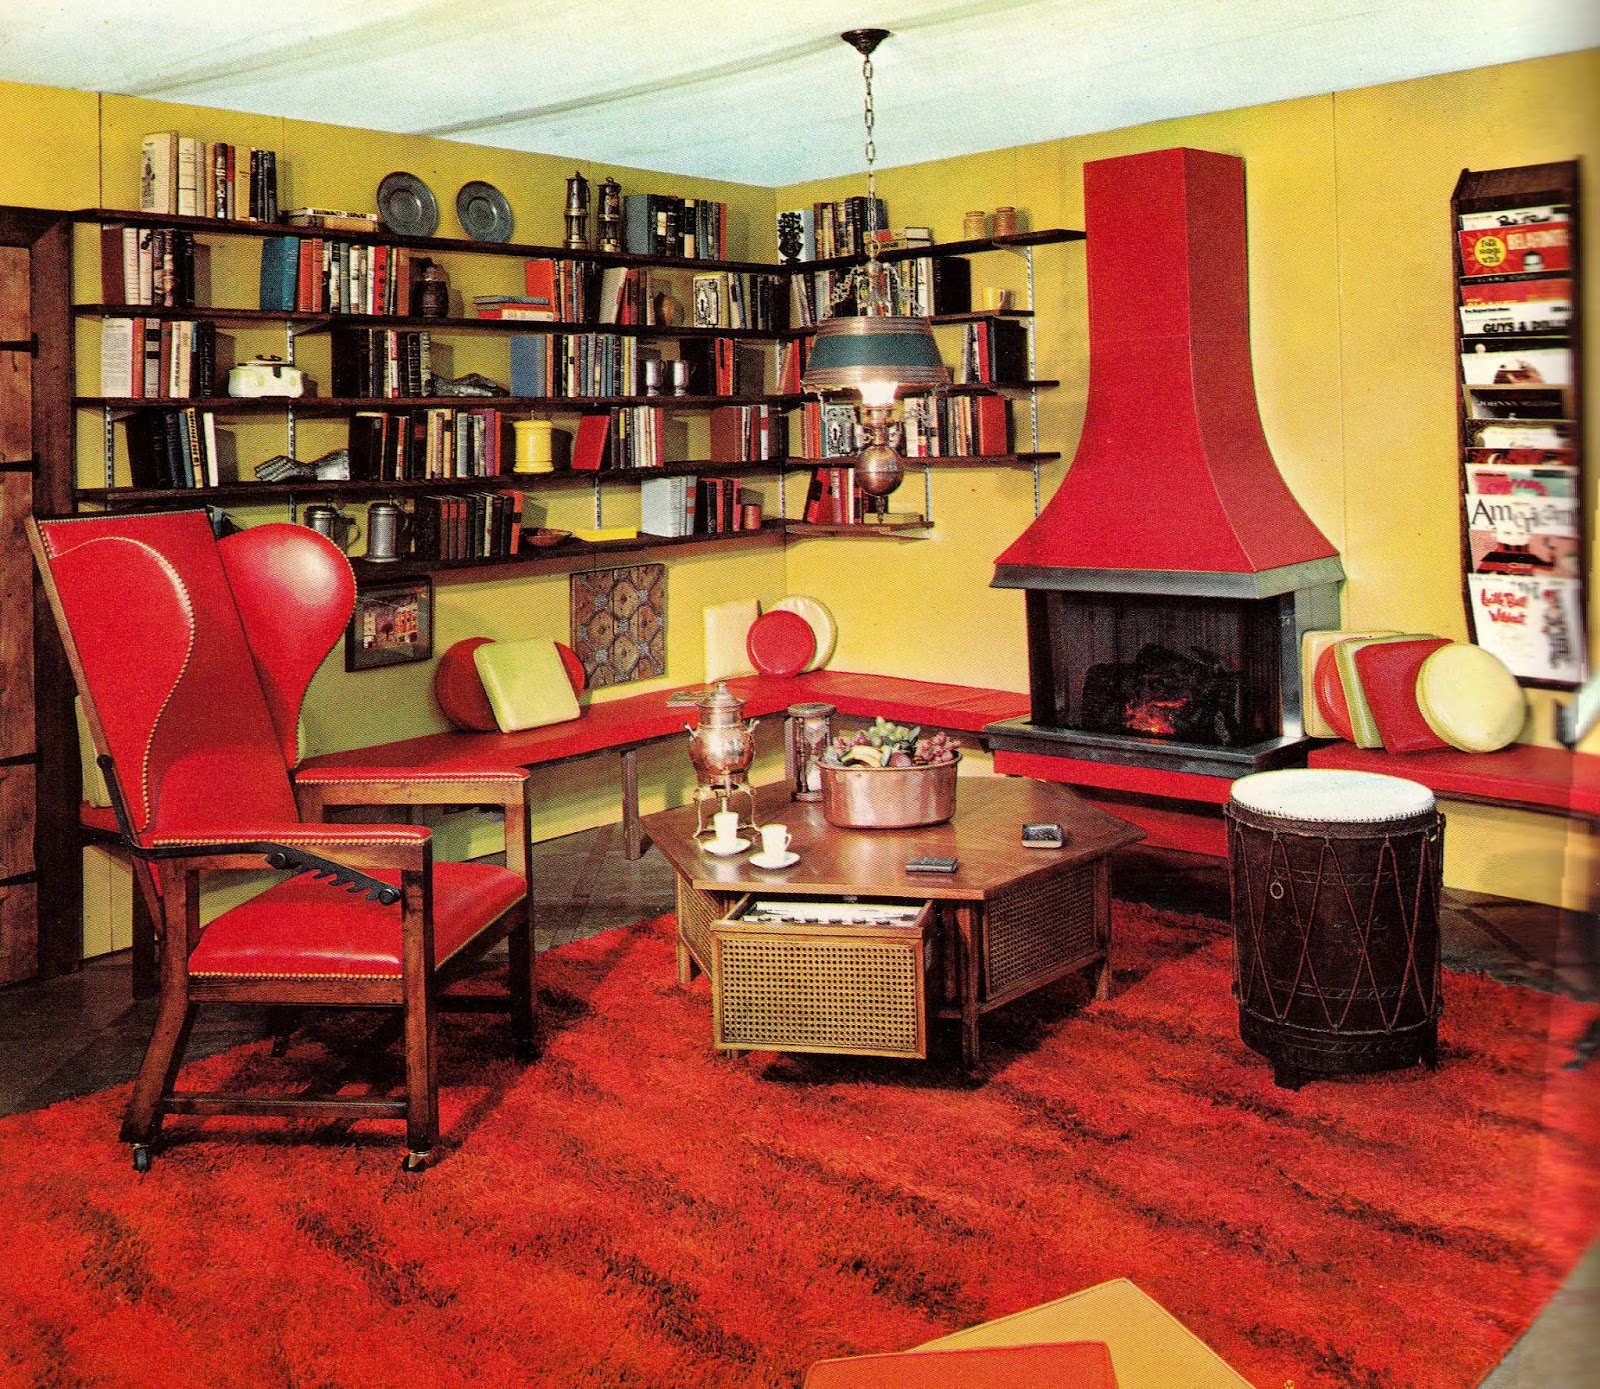 1960s Interior Dcor: The Decade of Psychedelia Gave Rise to Inventive ...